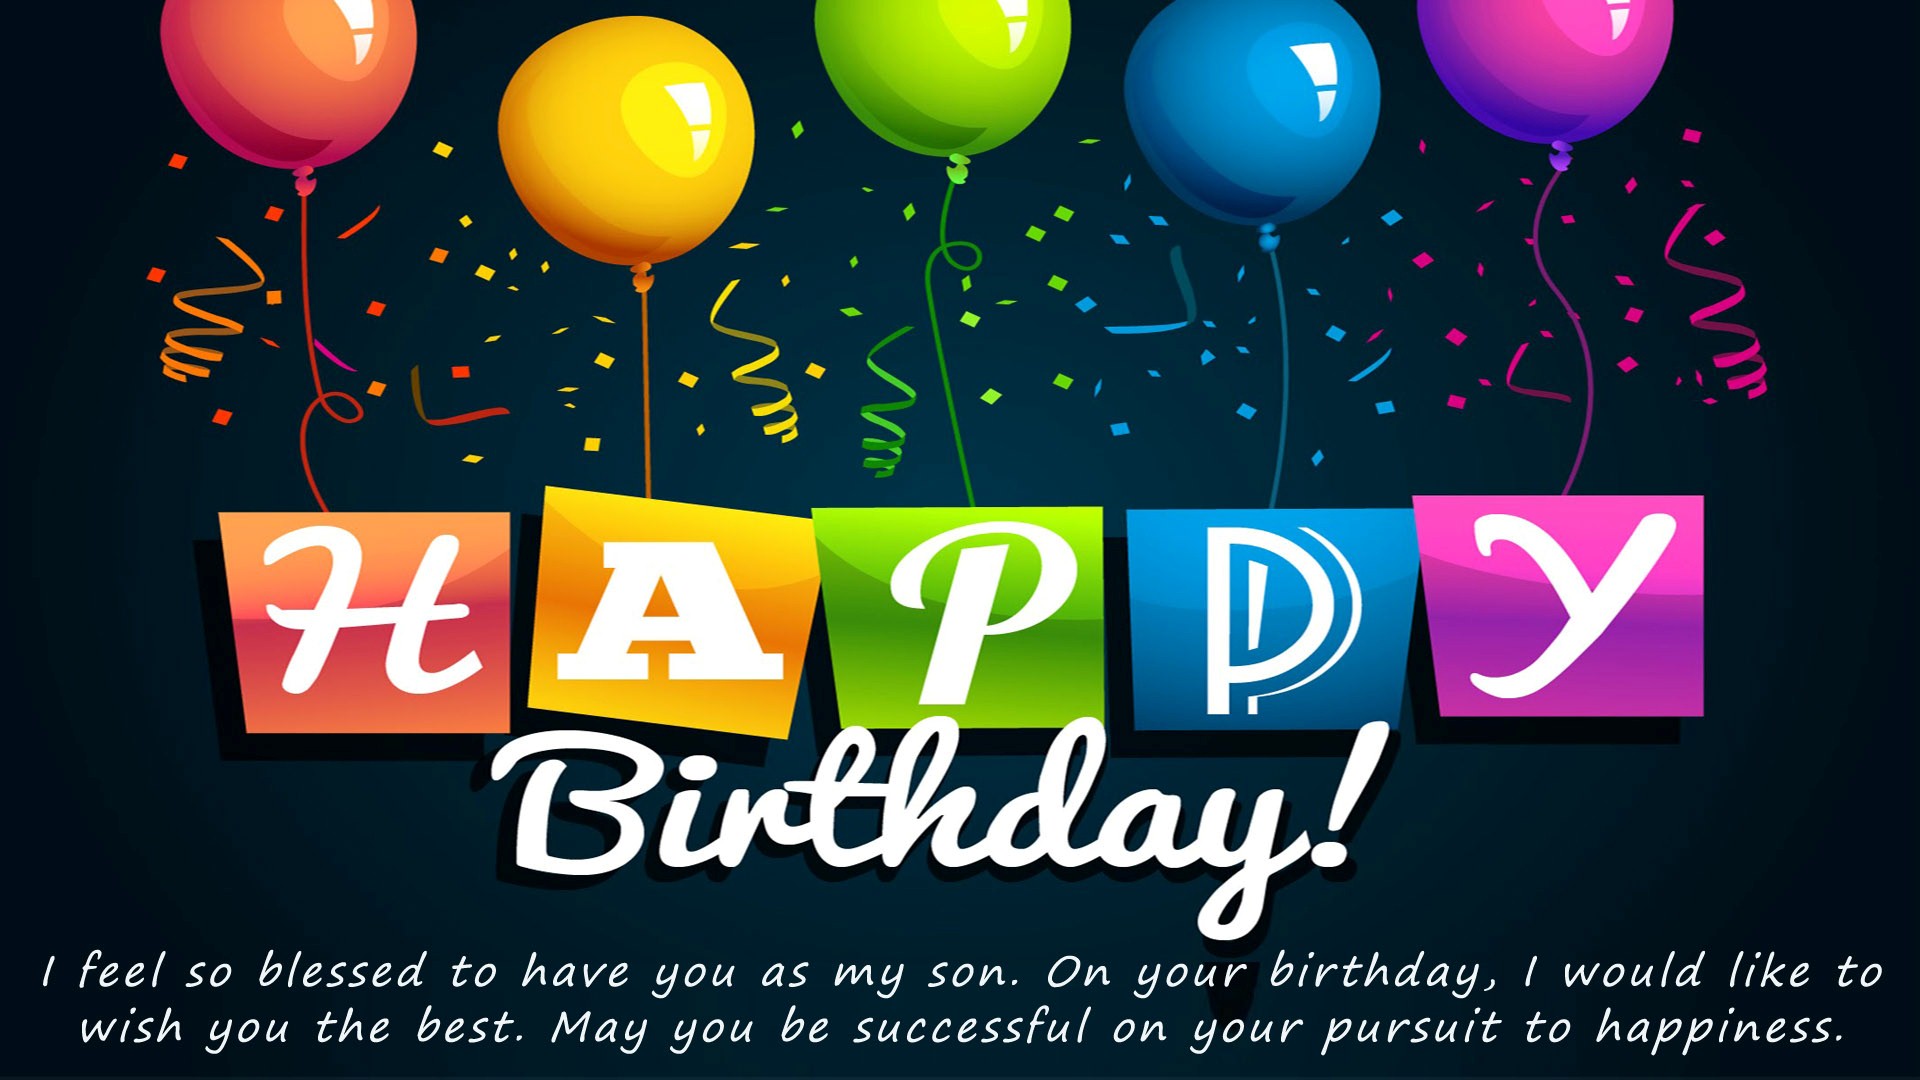 Wish You Happy Birthday My Cute Son - Hd Birthday Images For A Son -  1920x1080 Wallpaper 